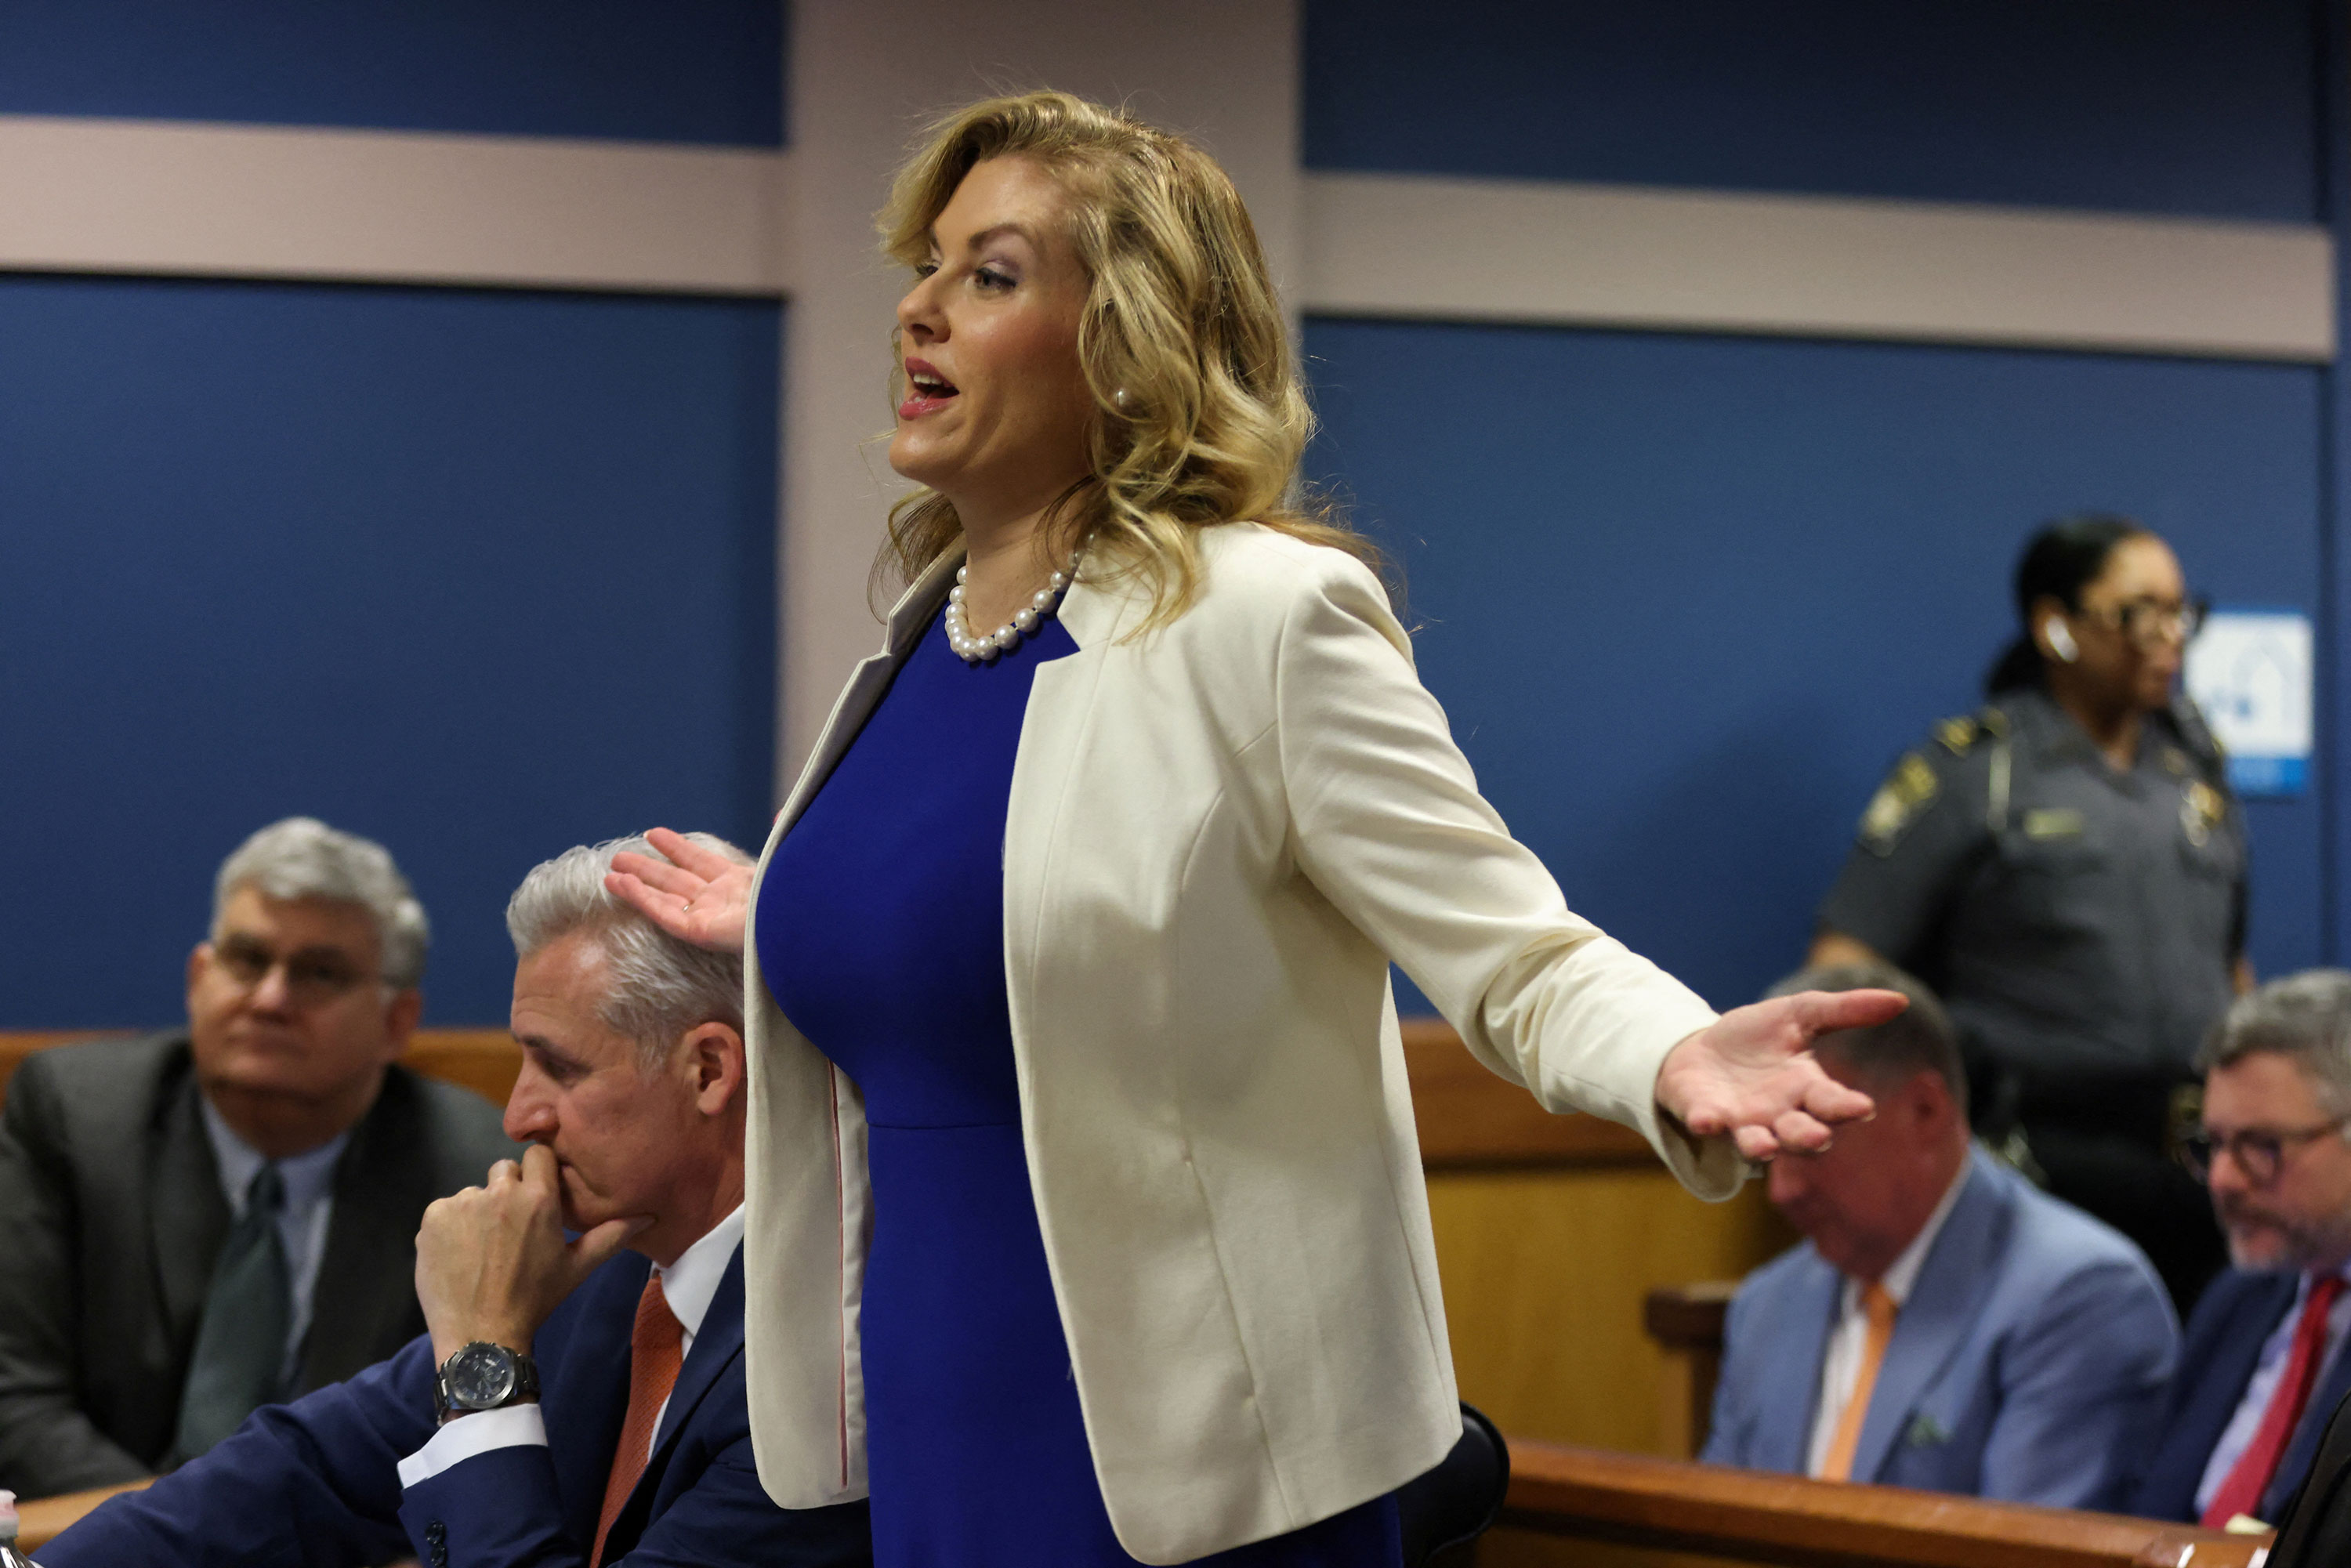 Defense attorney Ashleigh Merchant speaks during the hearing at the Fulton County Courthouse in Atlanta on Thursday.